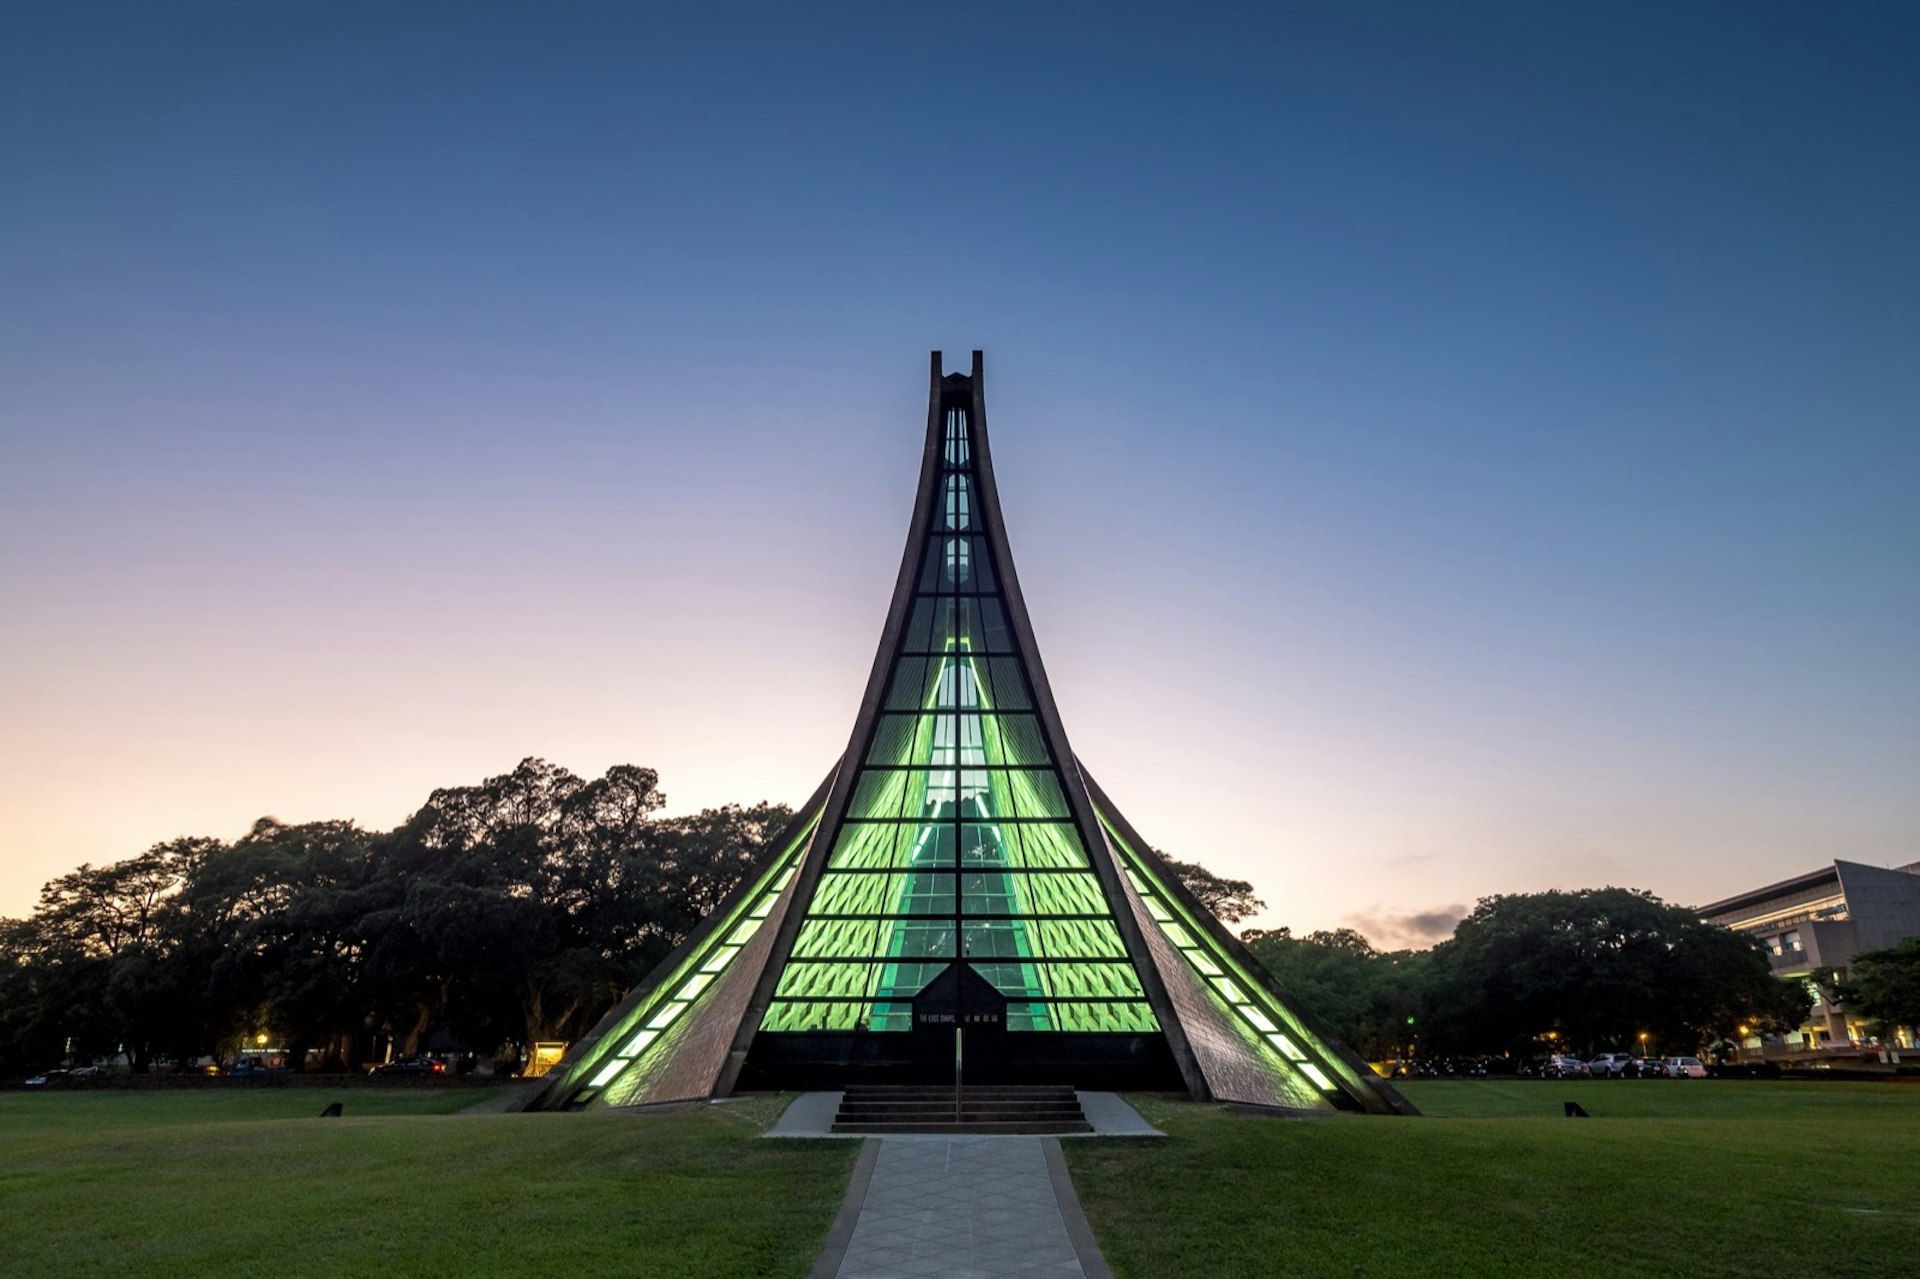 The Luce Memorial Chapel a tee pee shaped structure glows green in twighlight